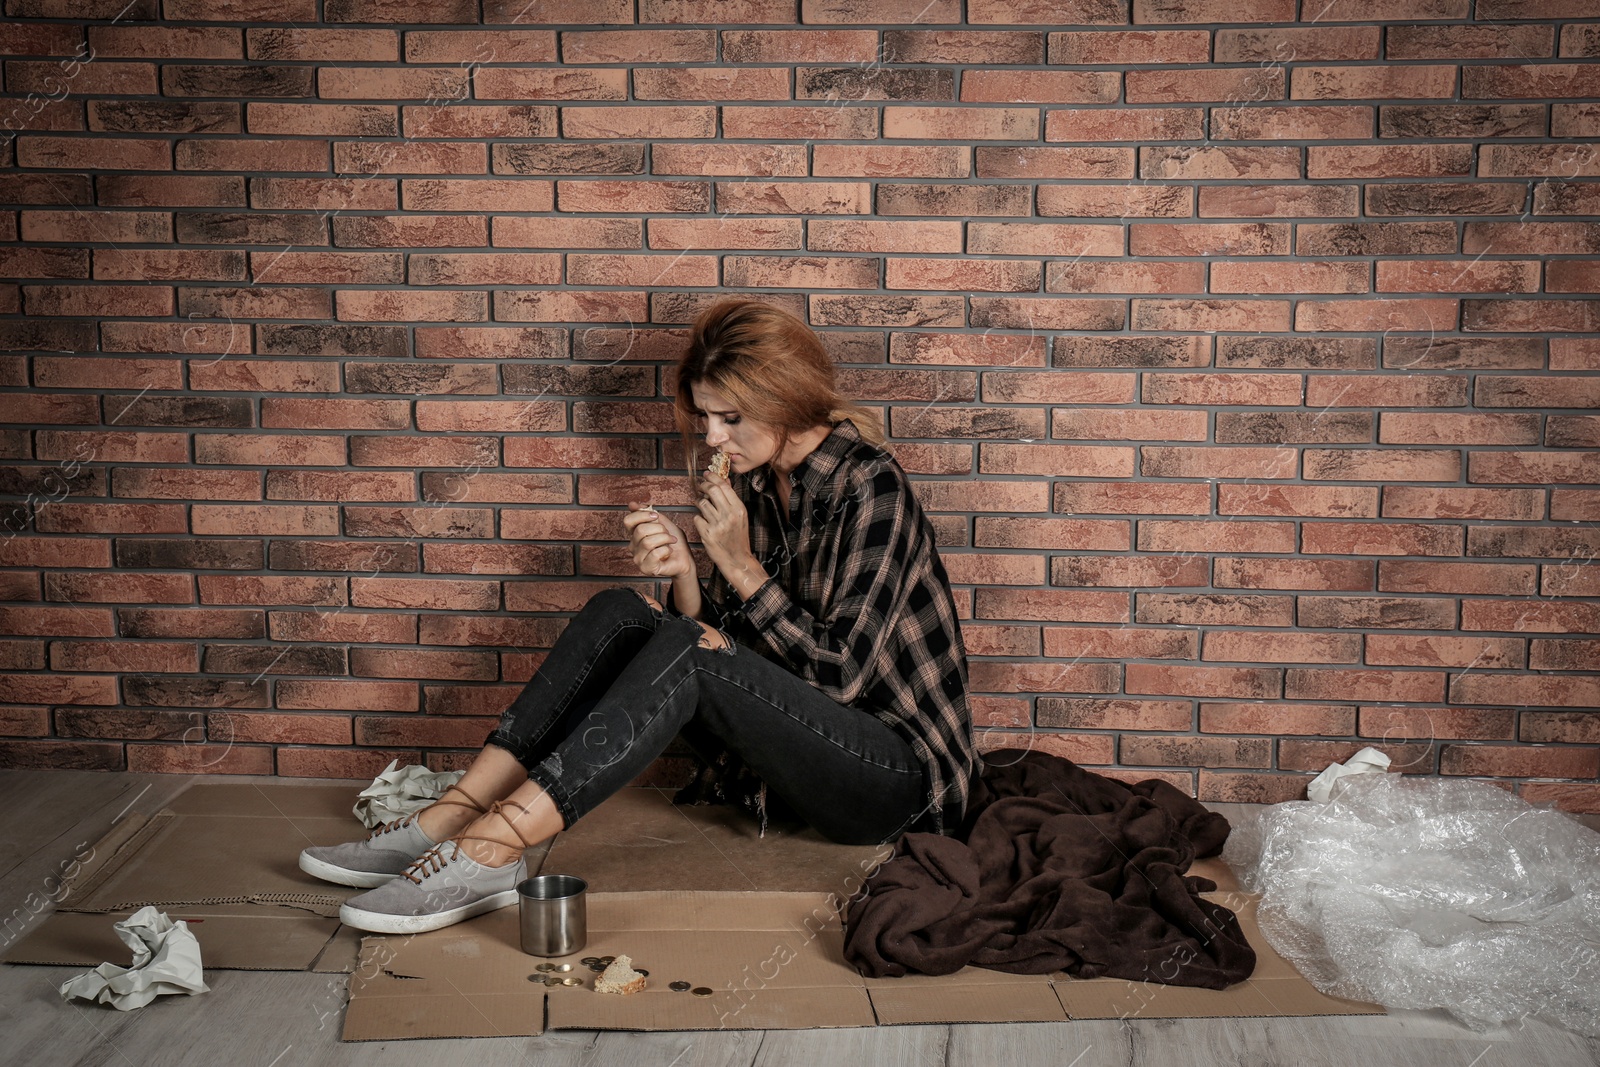 Photo of Poor homeless woman eating on floor near brick wall